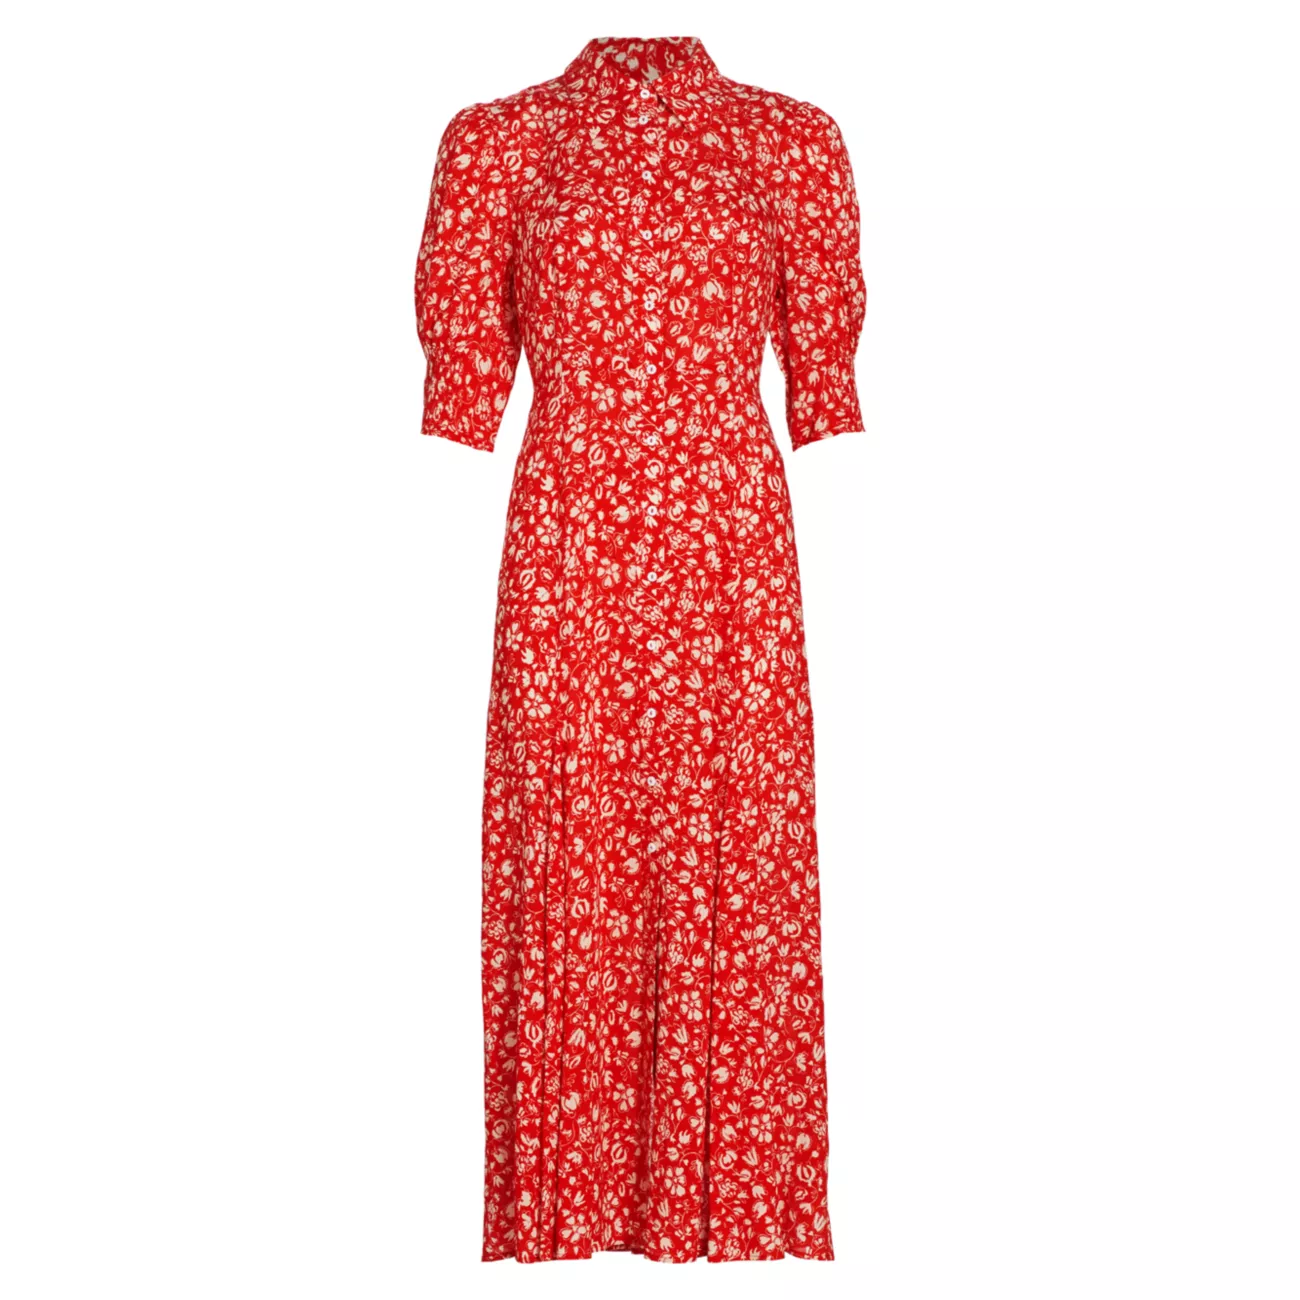 In The Spirit Of Palm Beach Bloom Floral Shirtdress RIXO